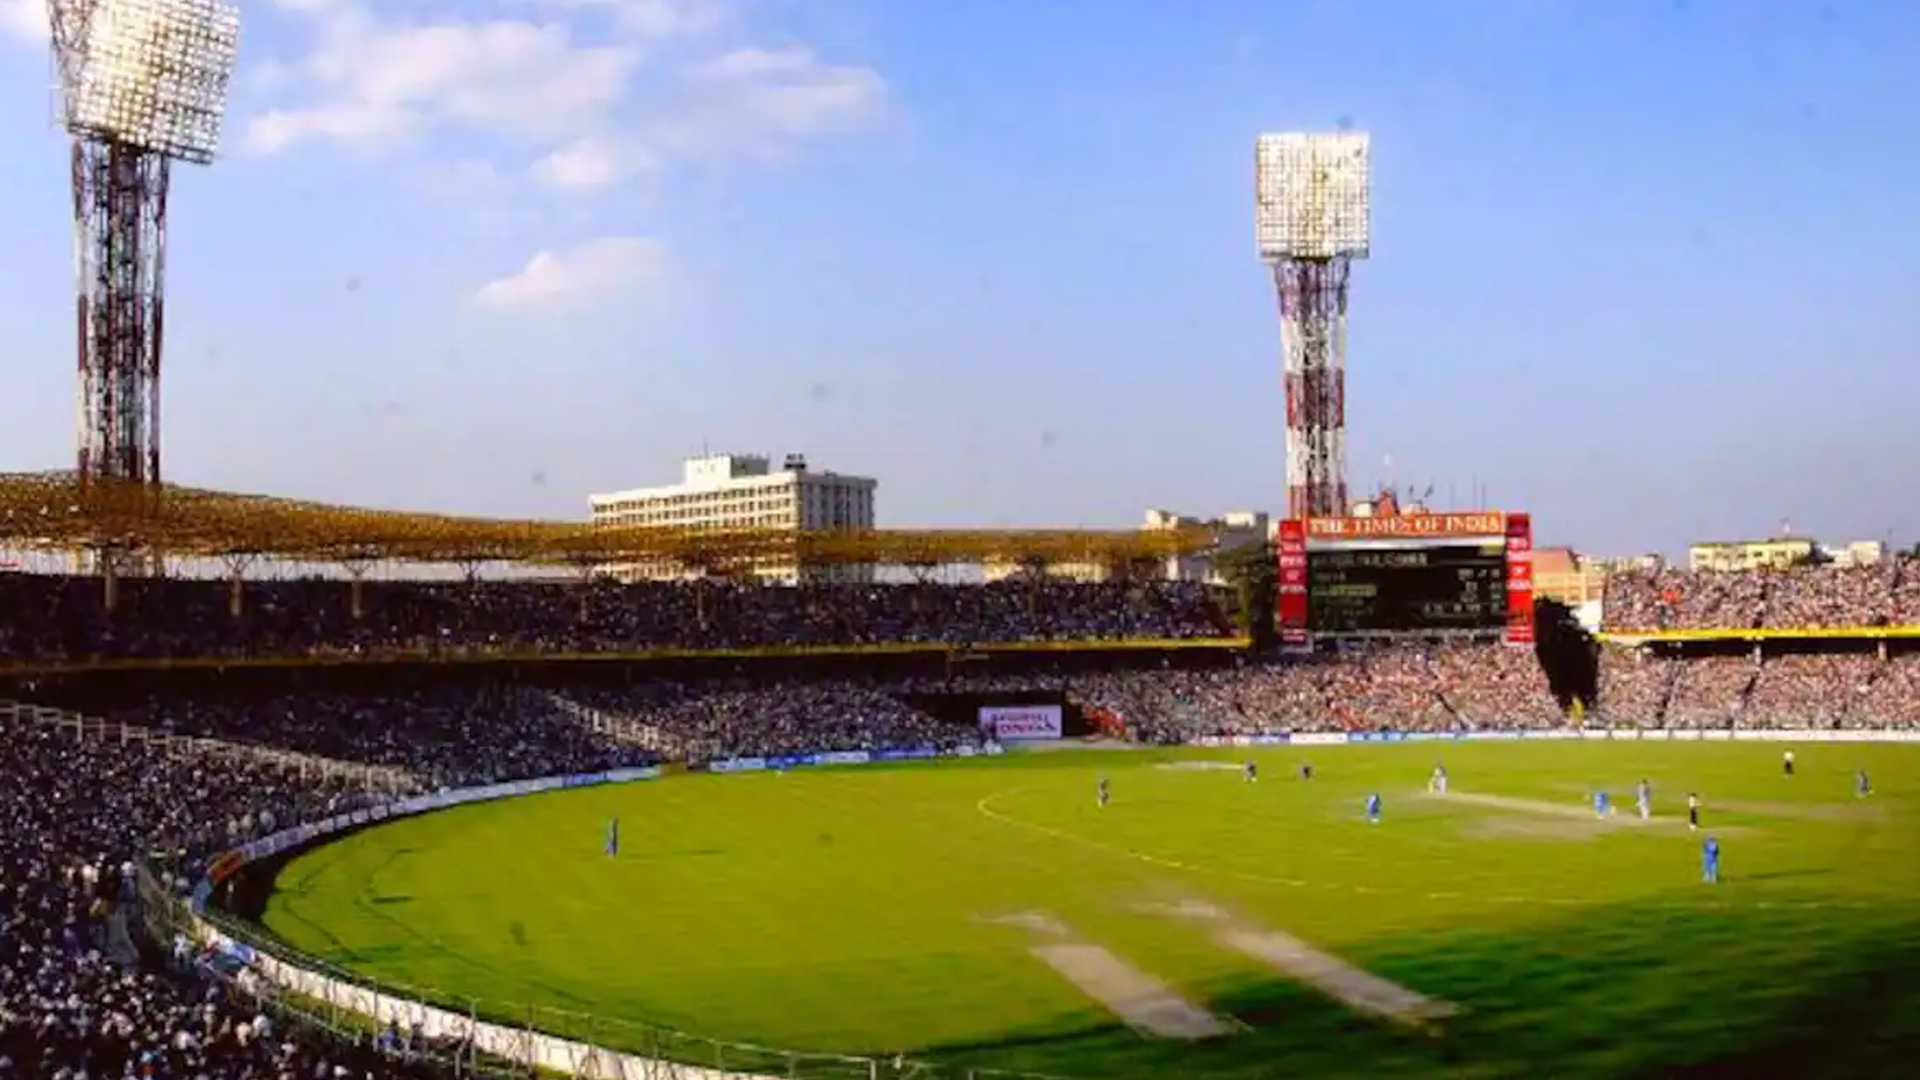 Eden Gardens Stadium | Take A Look At The Interesting Fact And History Of India's Oldest Cricket Stadium